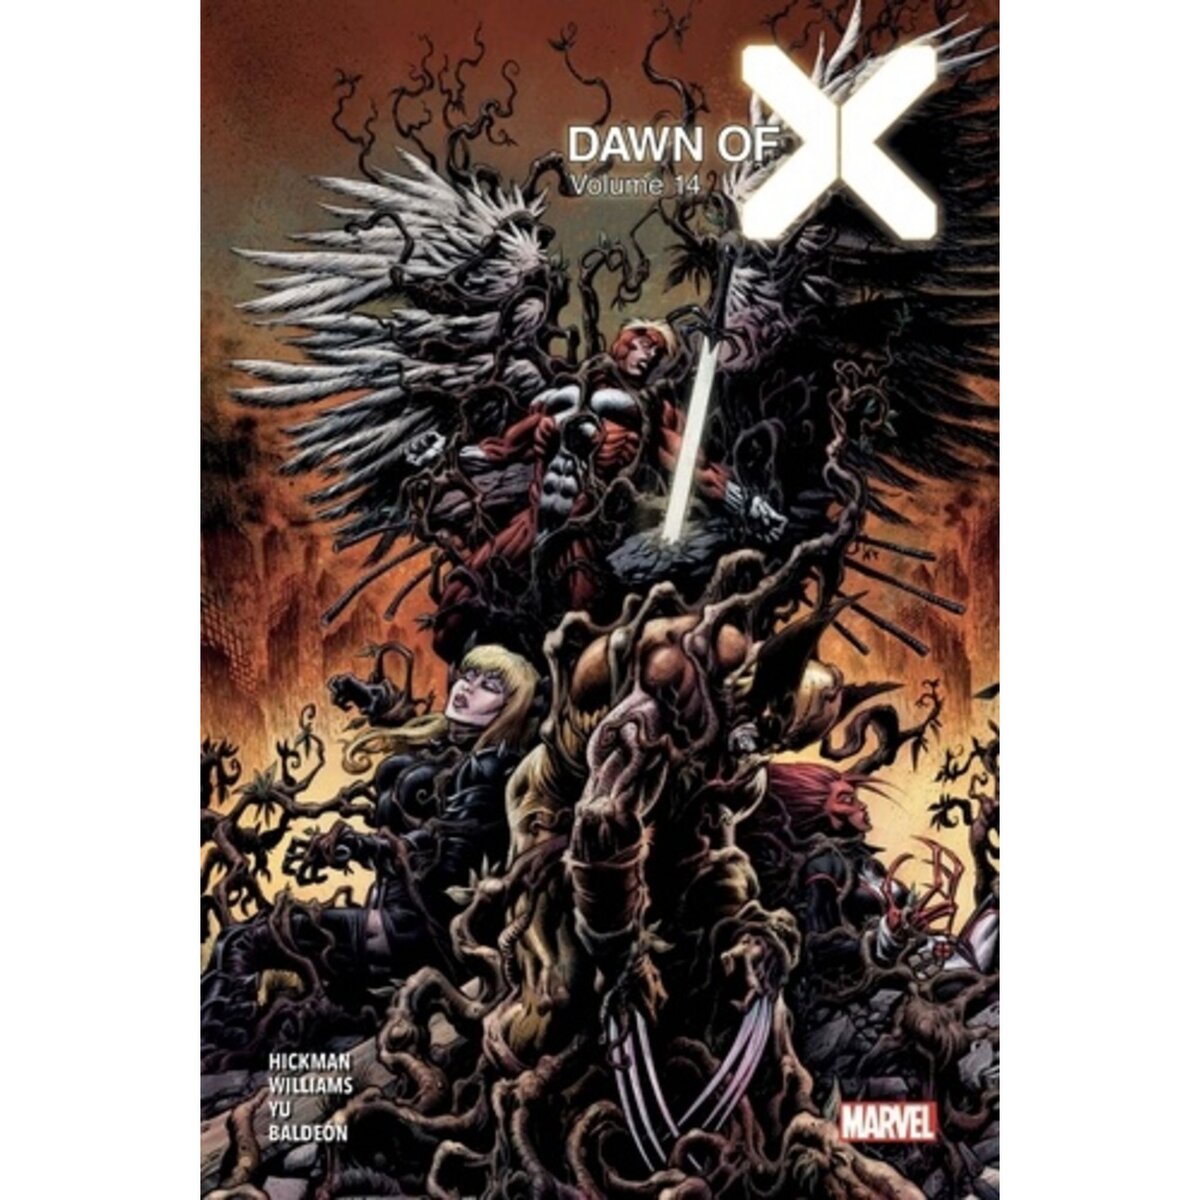  DAWN OF X TOME 14 : DAWN OF X VOL. 14 (EDITION COLLECTOR). EDITION COLLECTOR, Hickman Jonathan